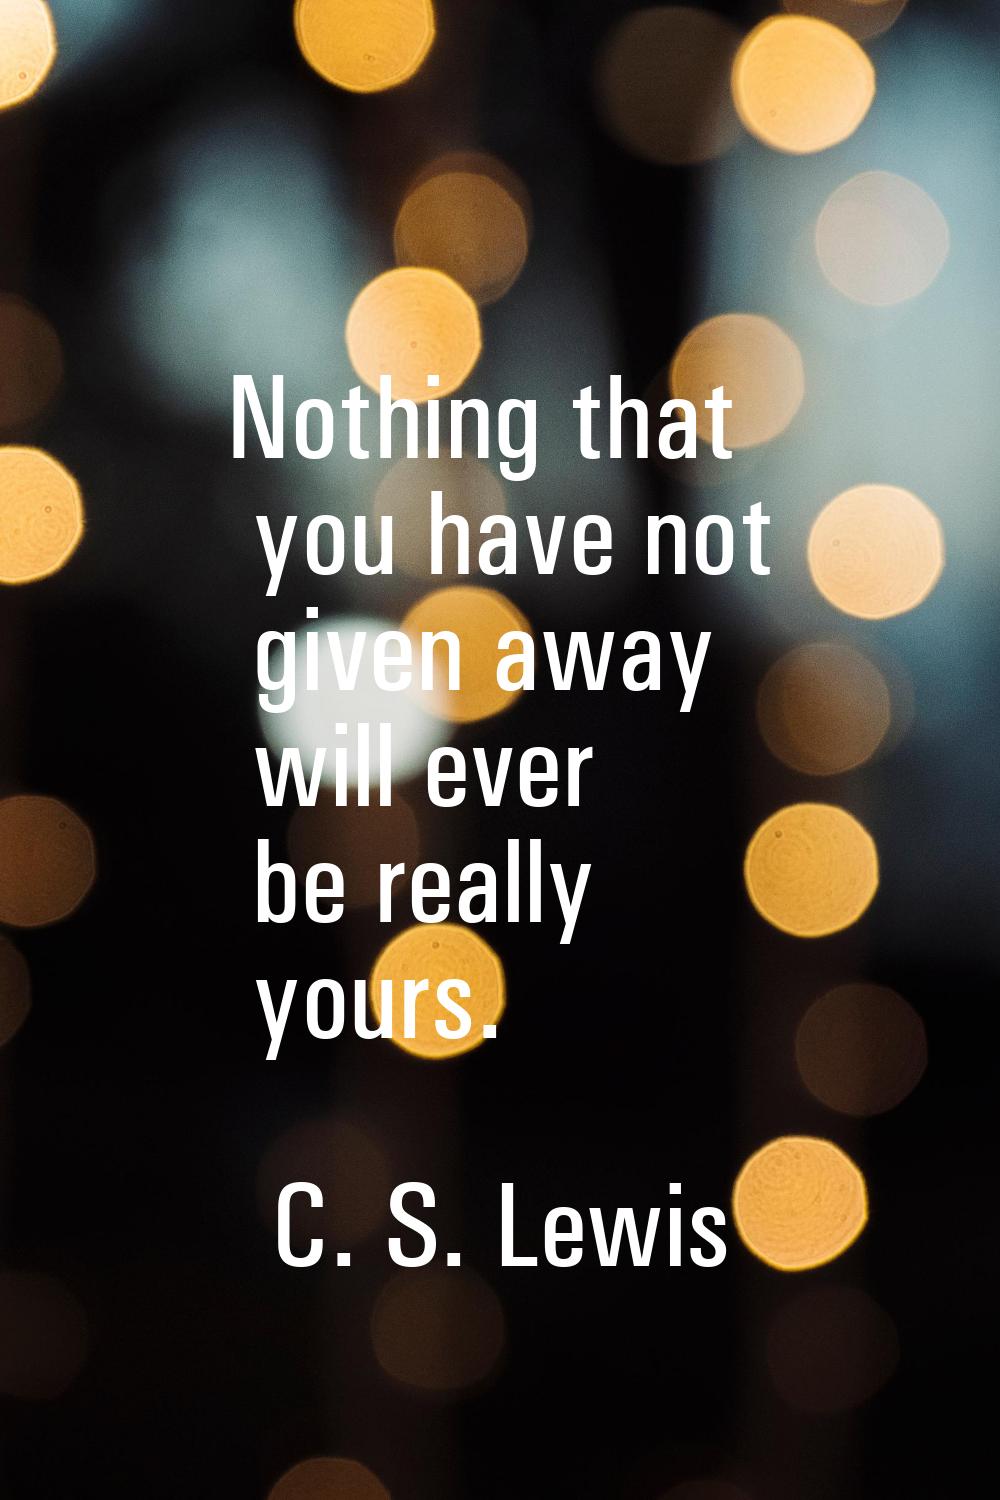 Nothing that you have not given away will ever be really yours.